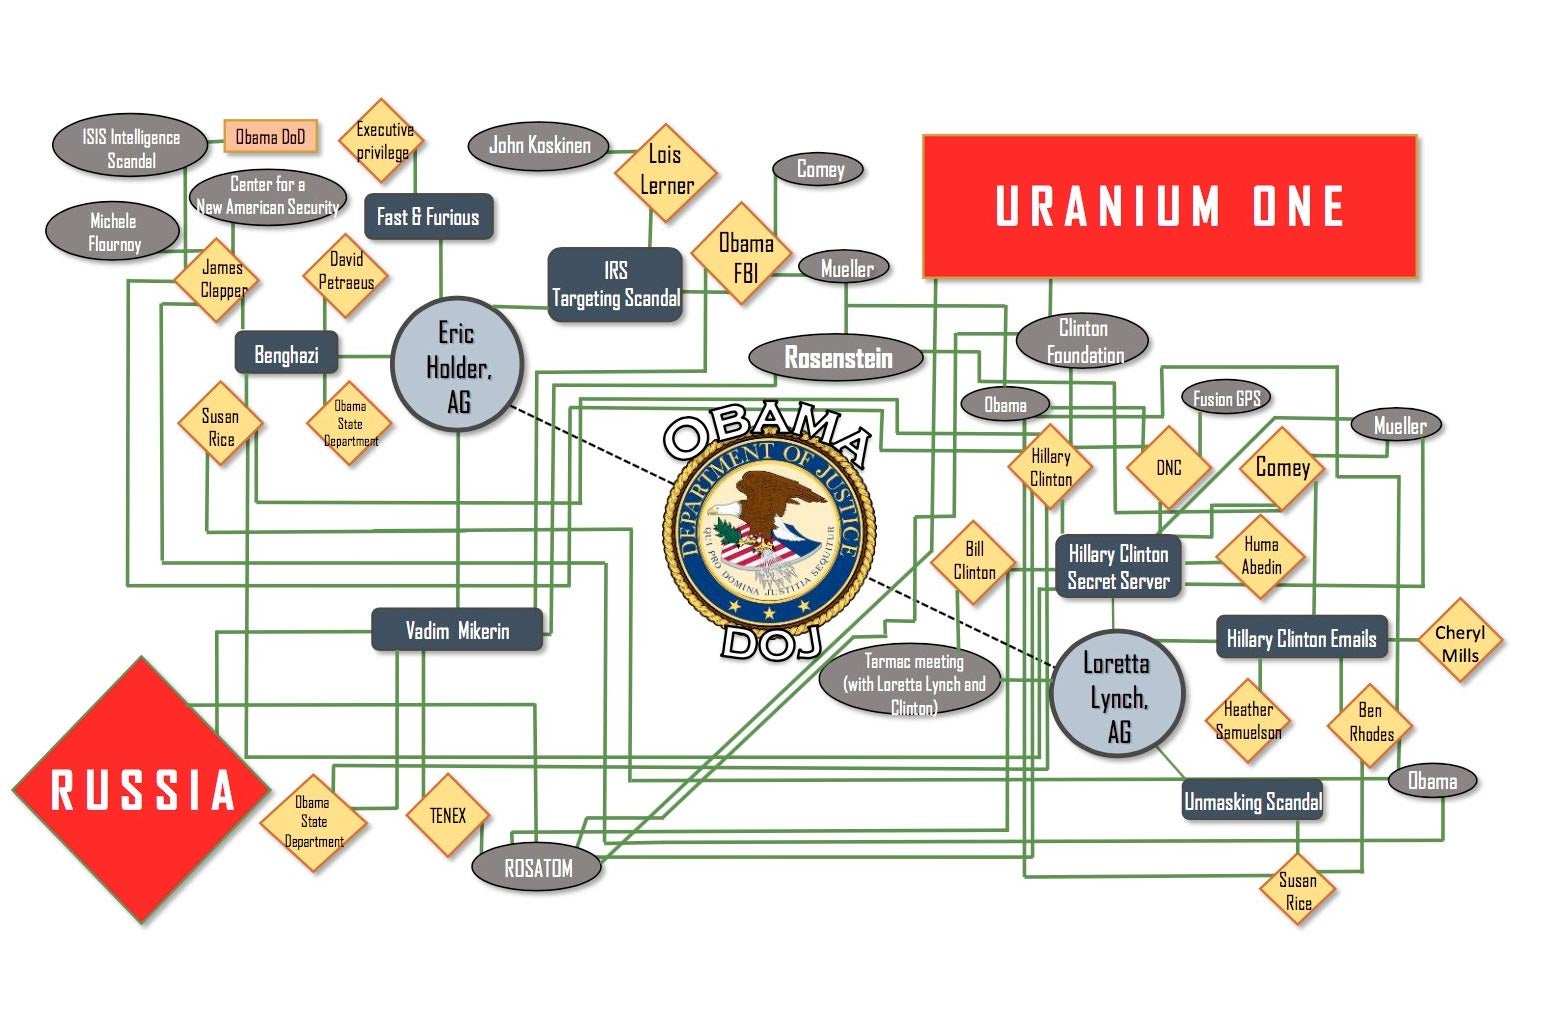 A crowded flowchart showing dozens of connections between, for example, "Russia" and "Obama Department of Justice" and "Hillary Clinton Emails."